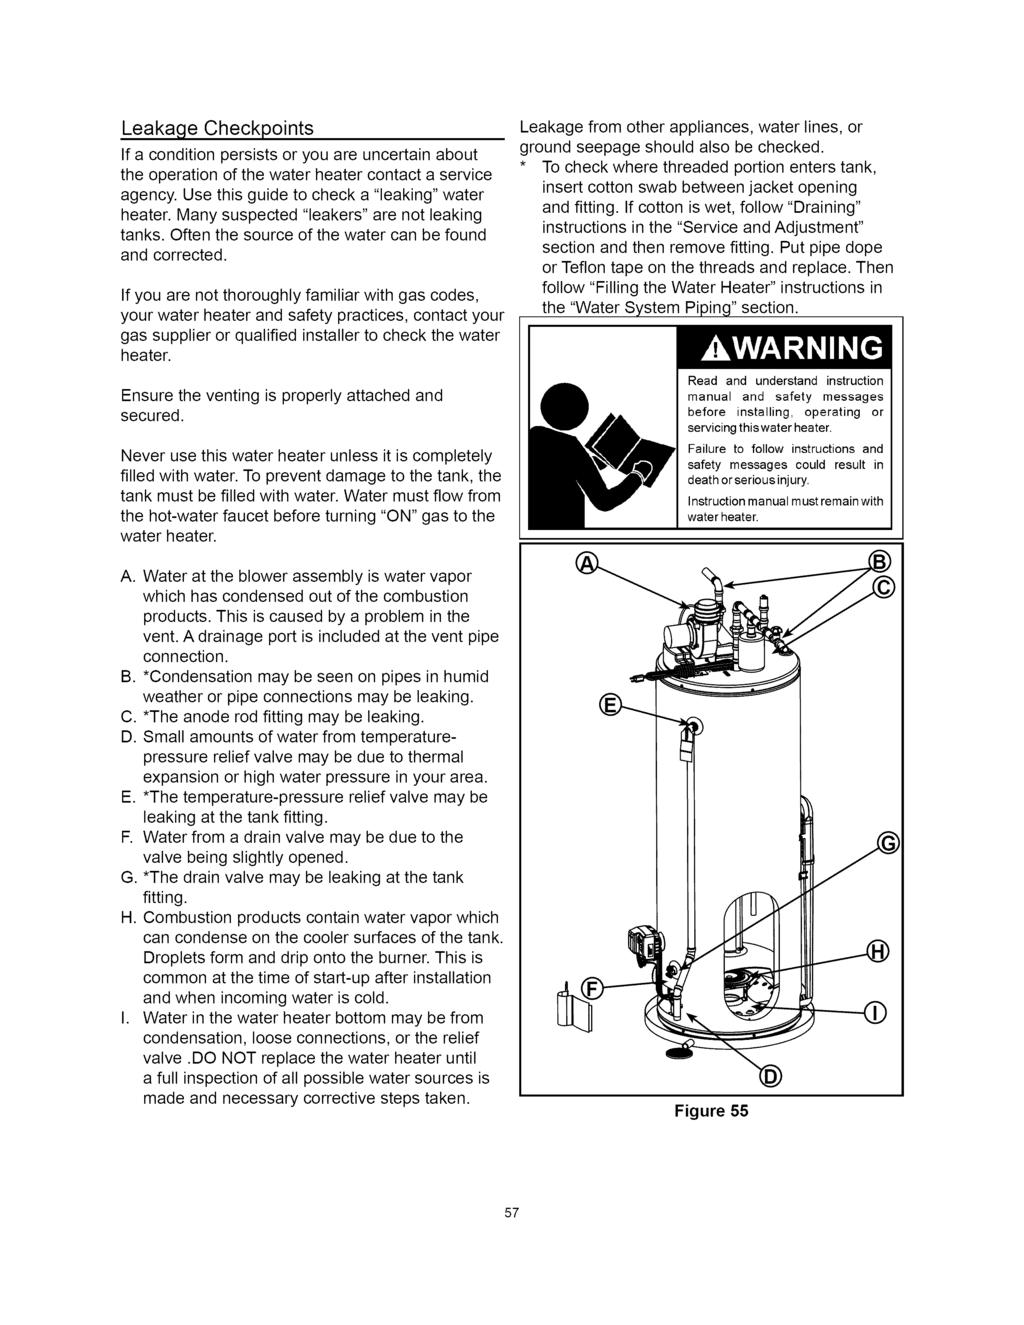 Leakage Checkpoints If a condition persists or you are uncertain about the operation of the water heater contact a service agency. Use this guide to check a "leaking" water heater.